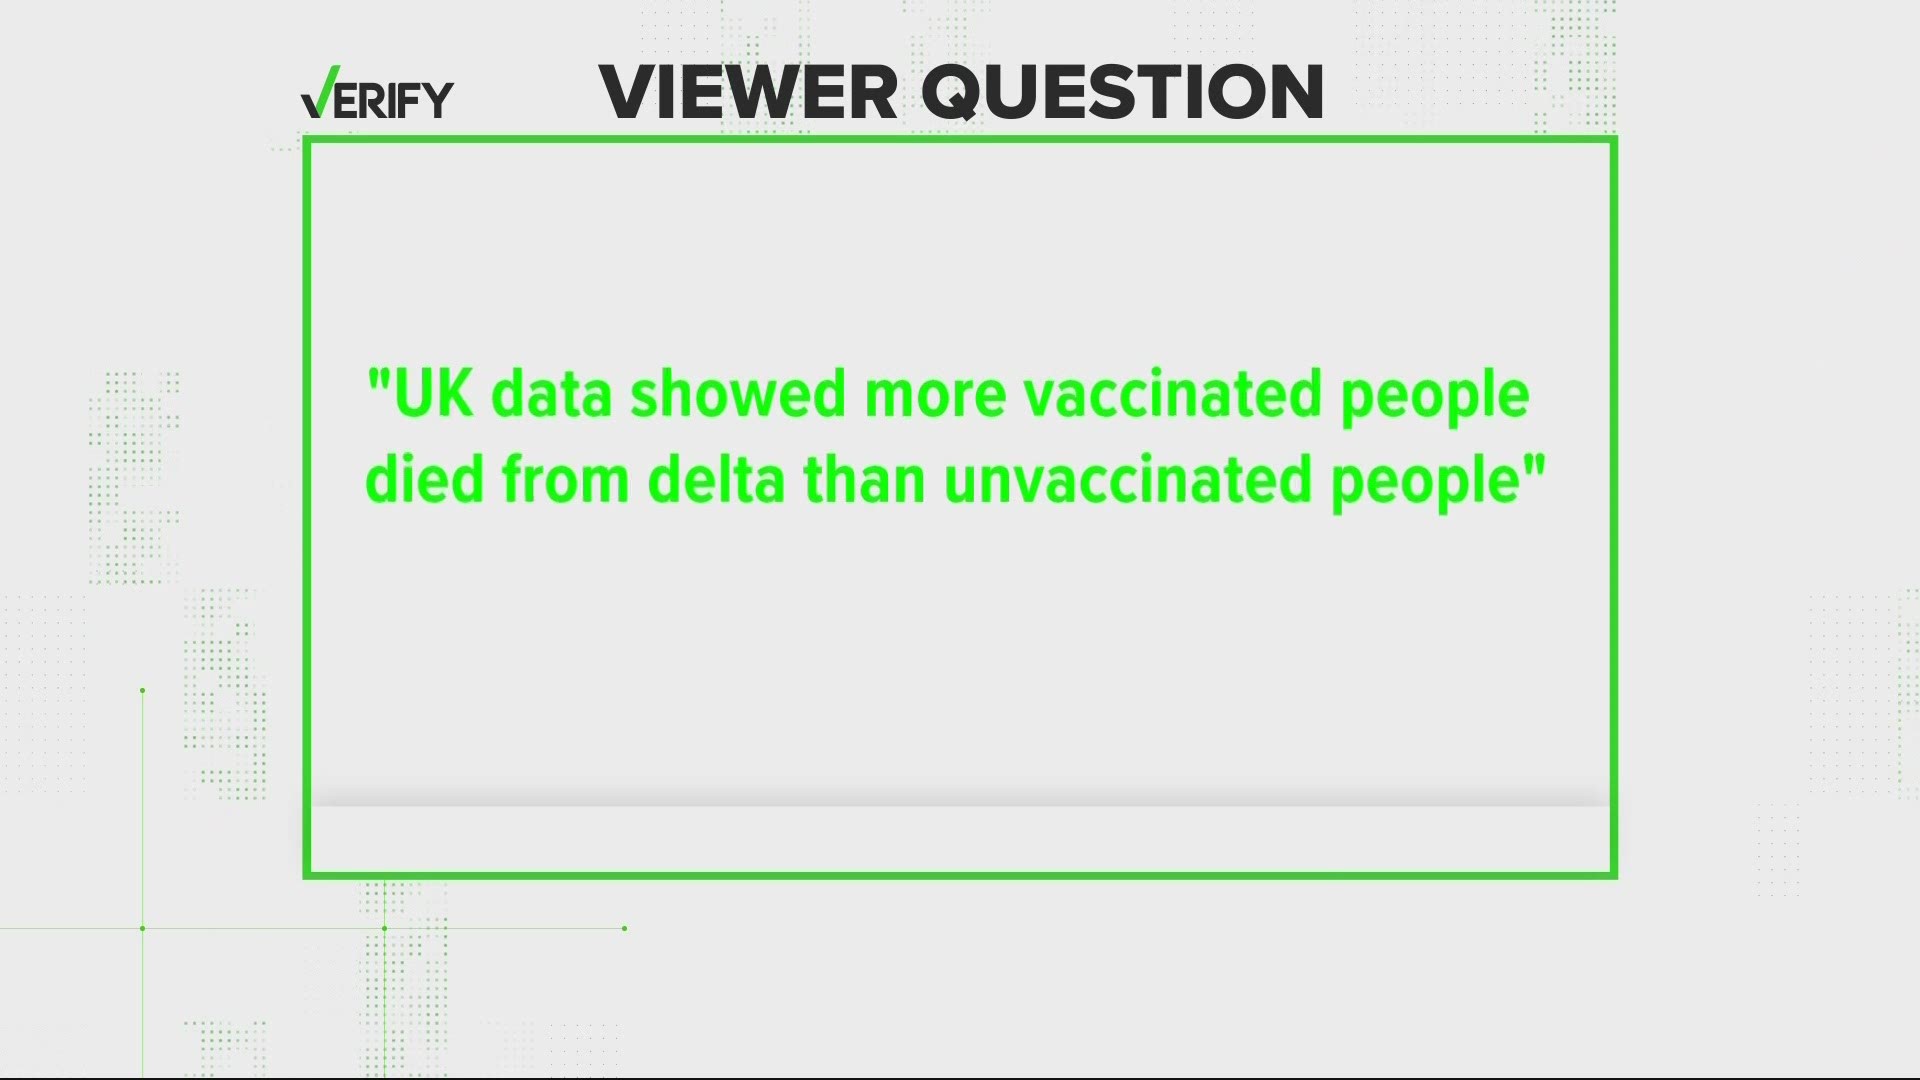 Online claims that U.K. data shows vaccinated people are more likely to die from the Delta COVID-19 variant take the numbers out of context, experts say.